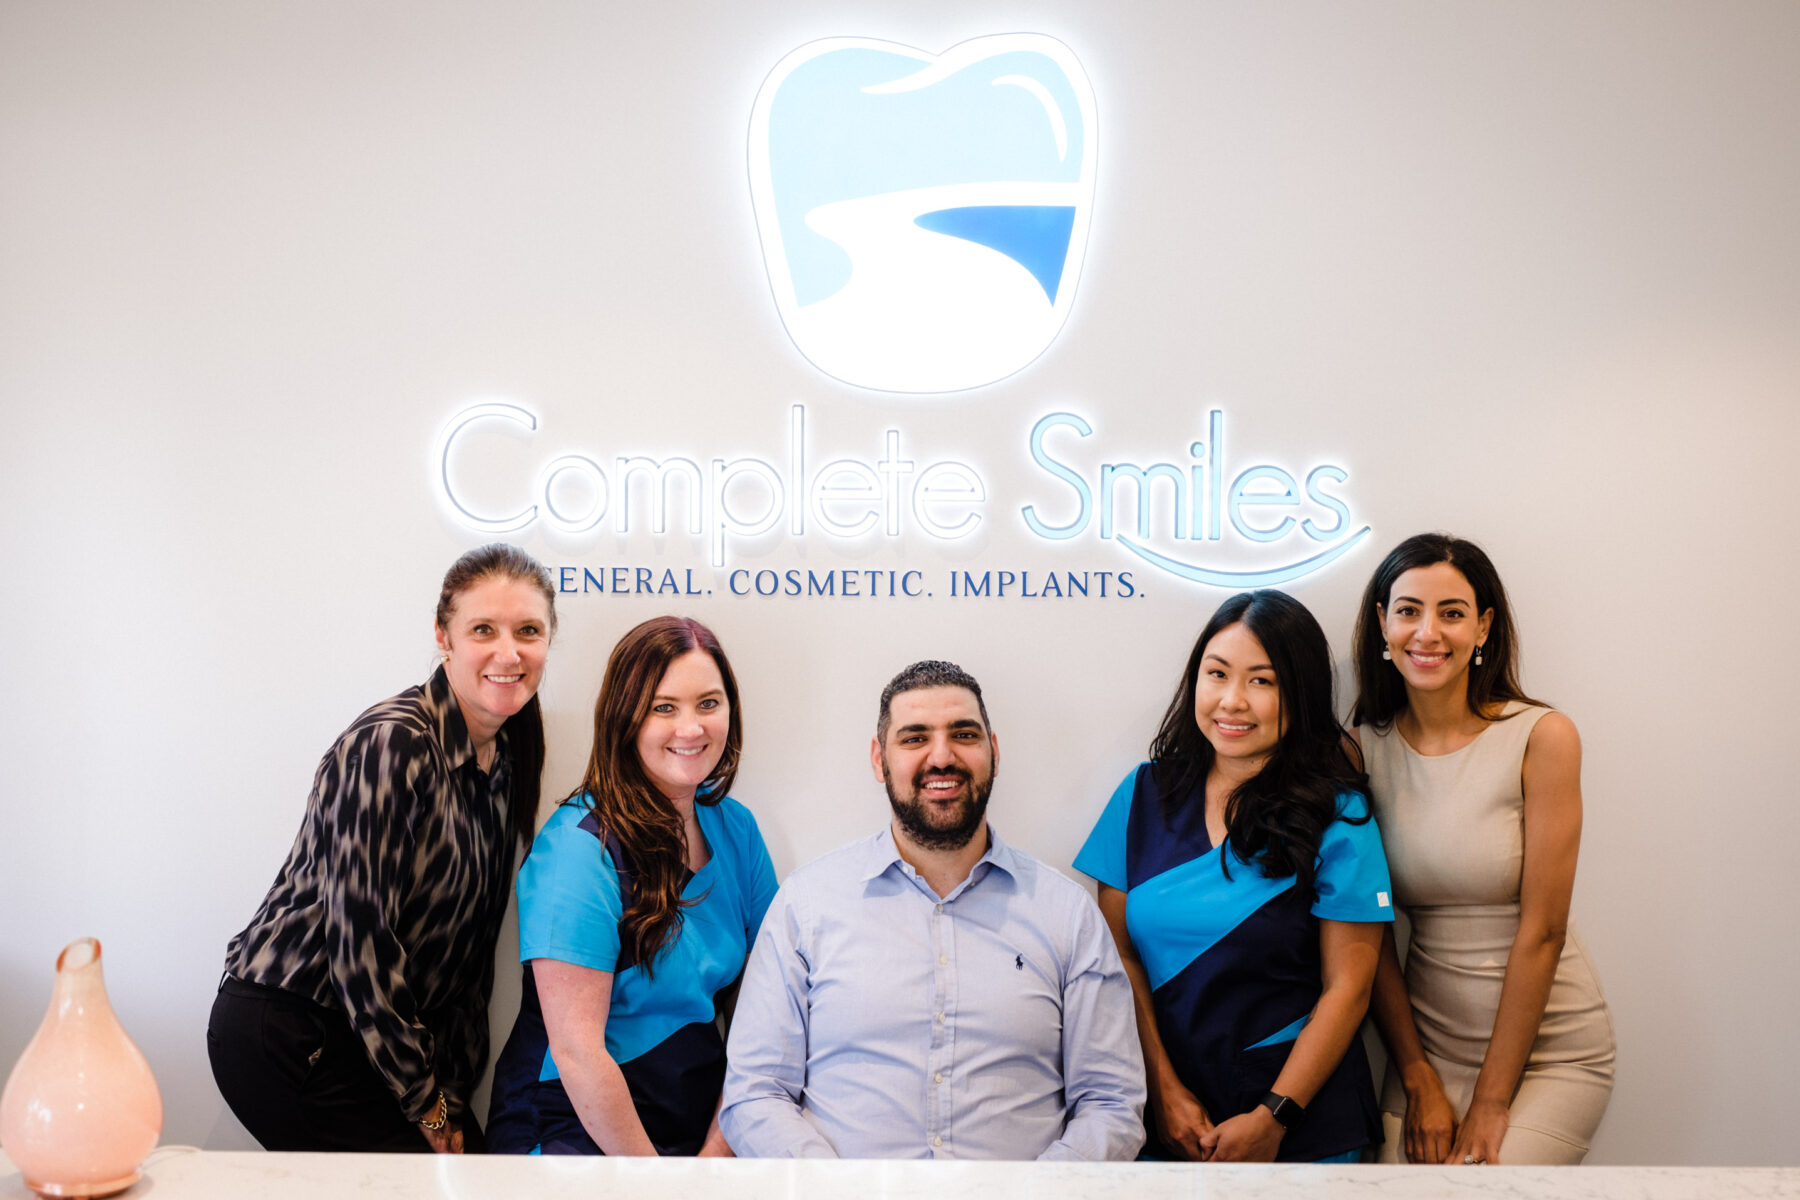 Meet the team of complete smiles